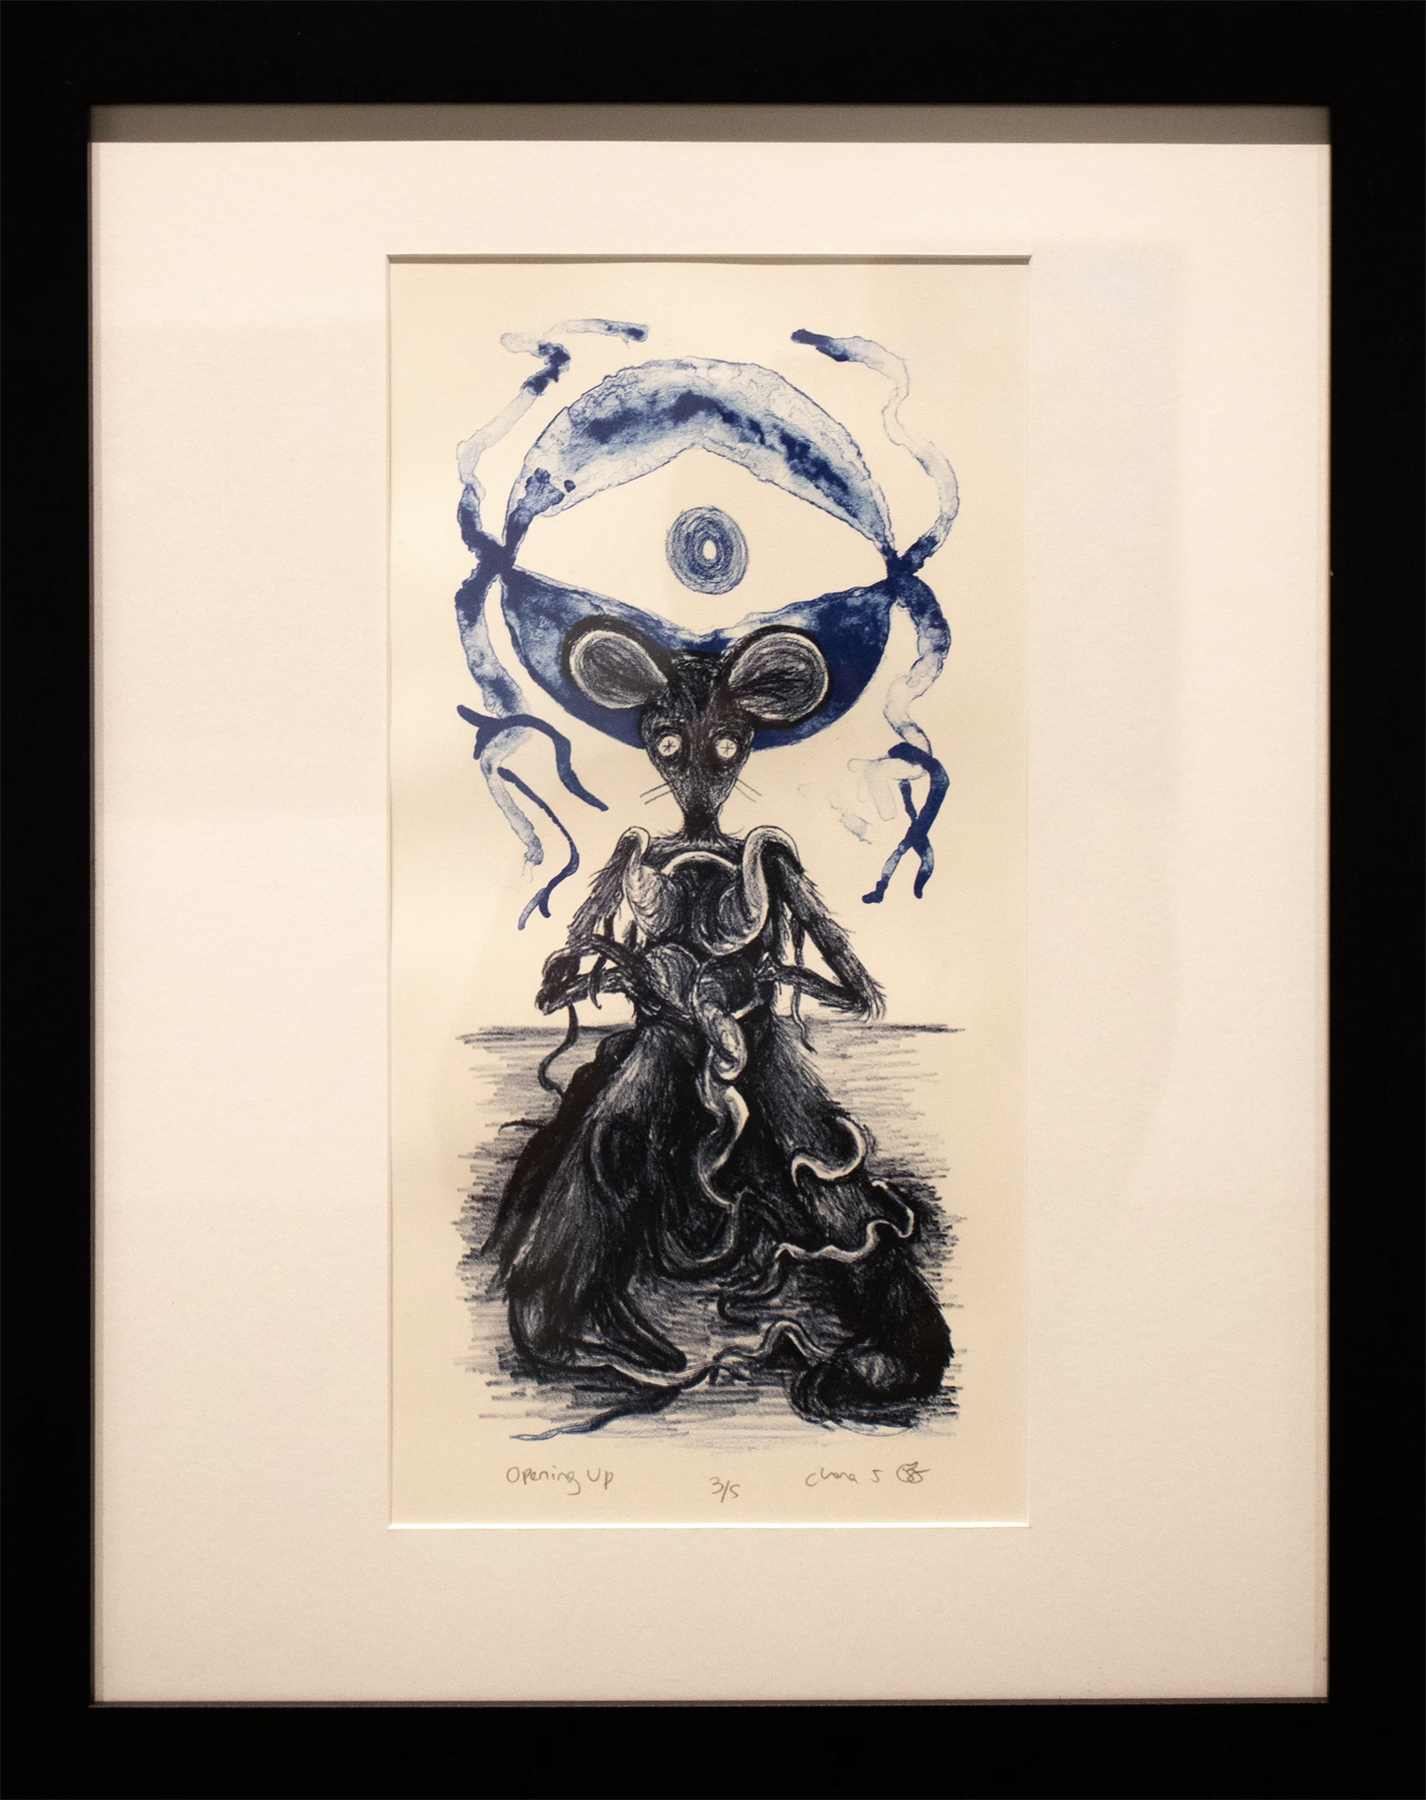 Black and blue framed lithograph of a mouse in front of an eye with abstract shapes emerging from the front of its torso, courtesy of the artist